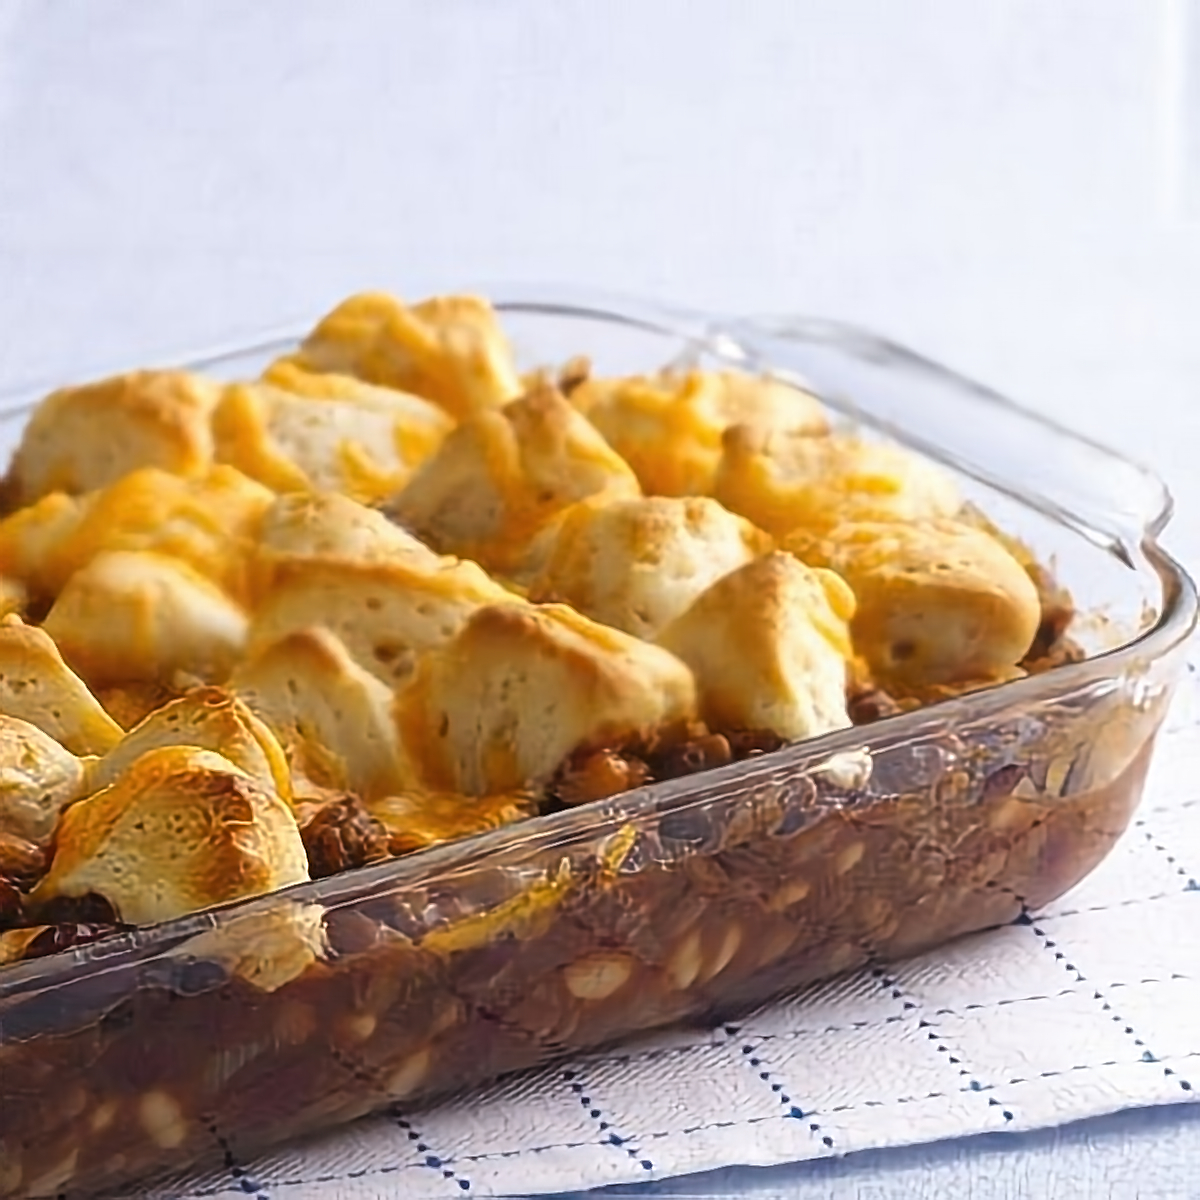 2. Cheesy Biscuit Bean and Beef CasseroleBeef and Biscuit Recipes